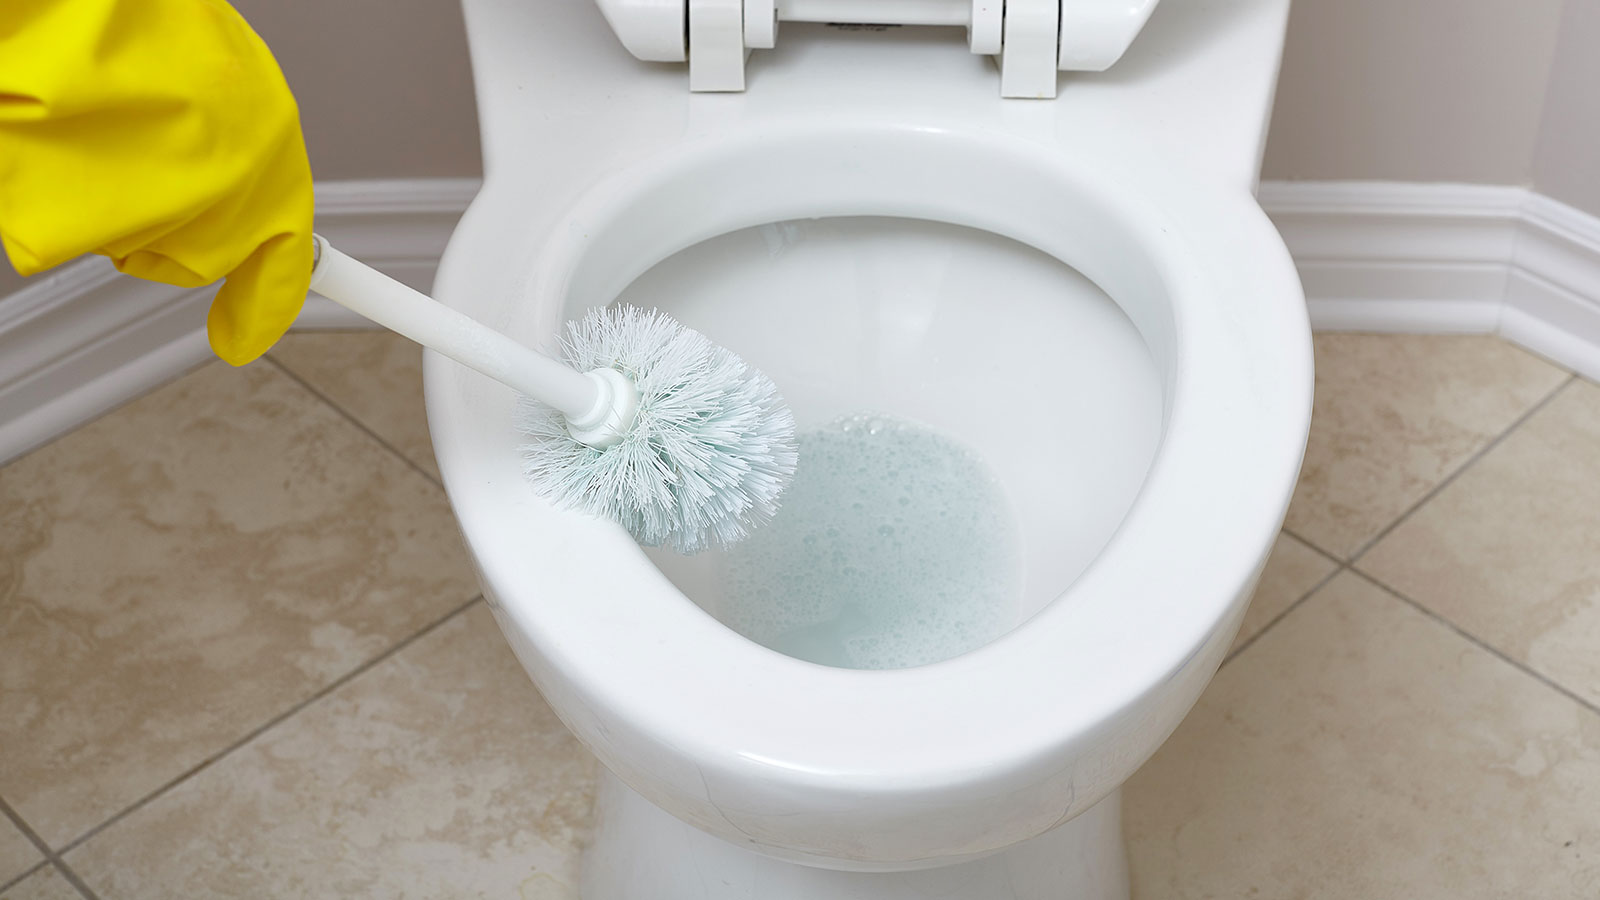 How To Retrieve A Toilet Brush From A Toilet